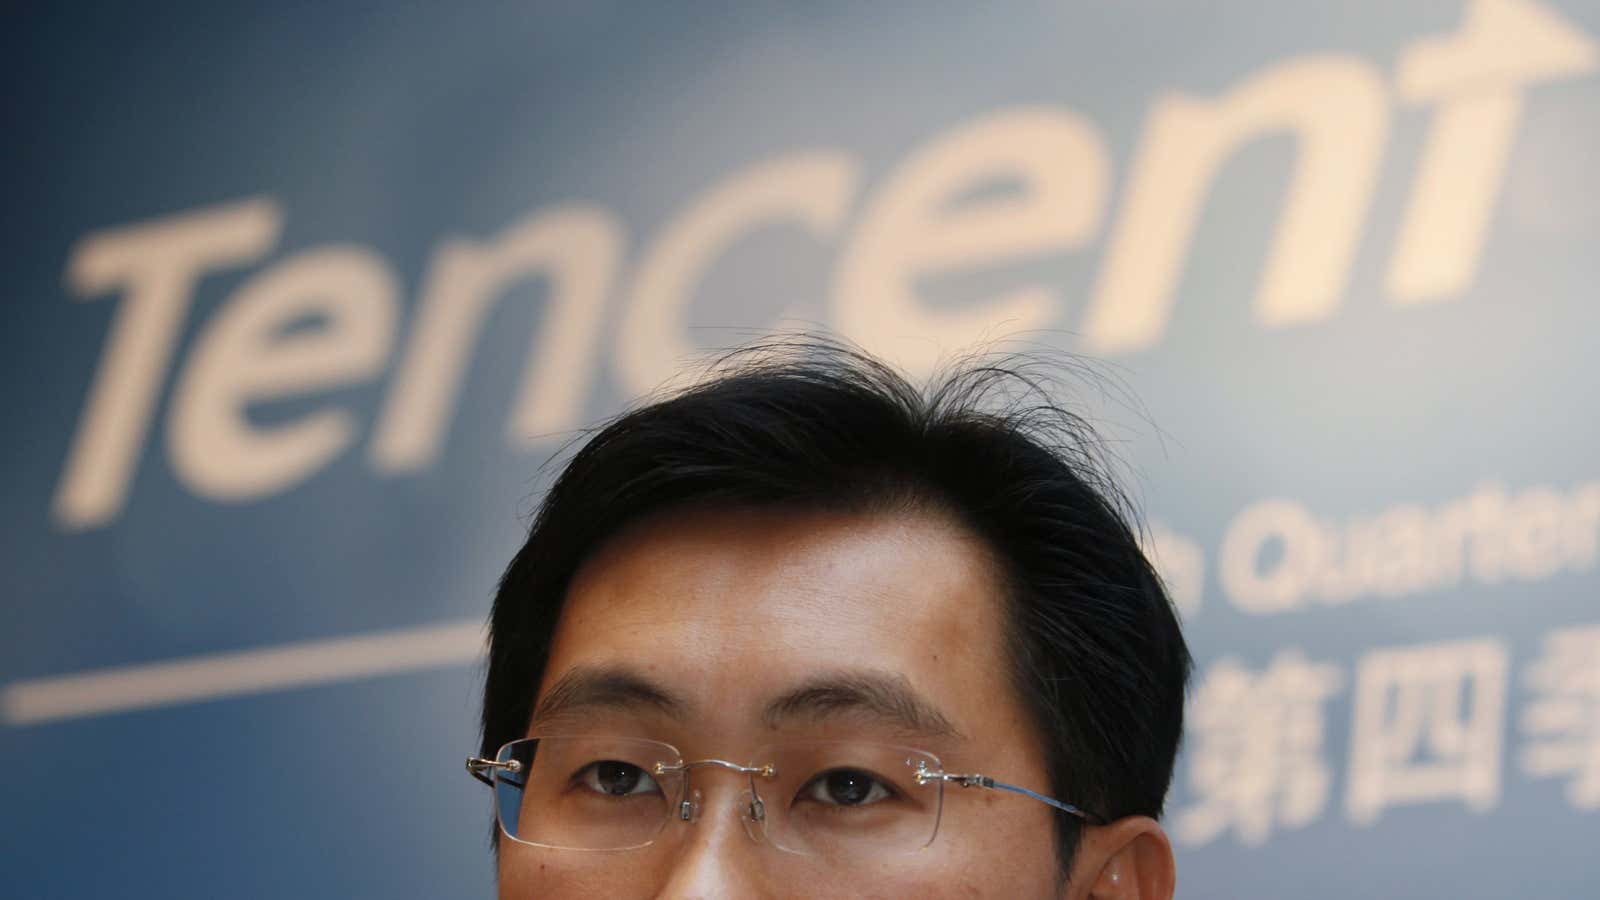 Pony Ma, founder of China’s largest internet company, would have nobody speak evil on WeChat.